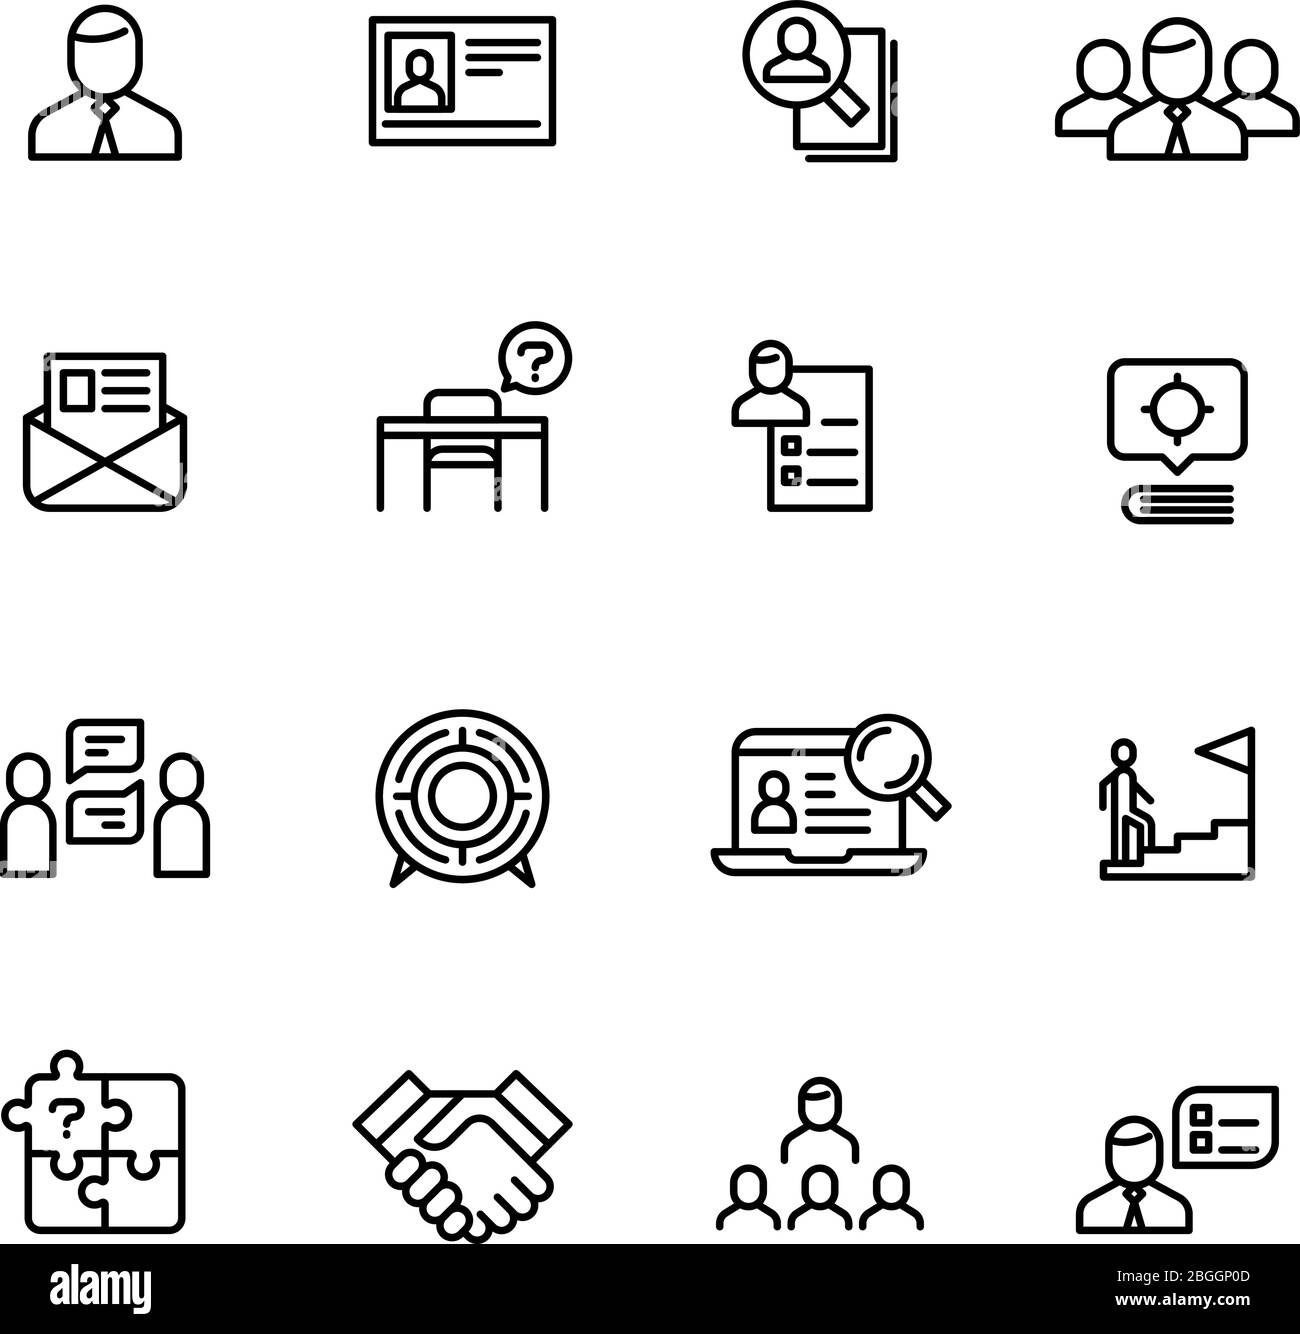 Head hunting, professional people management line icons. Search for employees, job and career outline vector symbols. Recruitment and career work, professional job and headhunting illustration Stock Vector